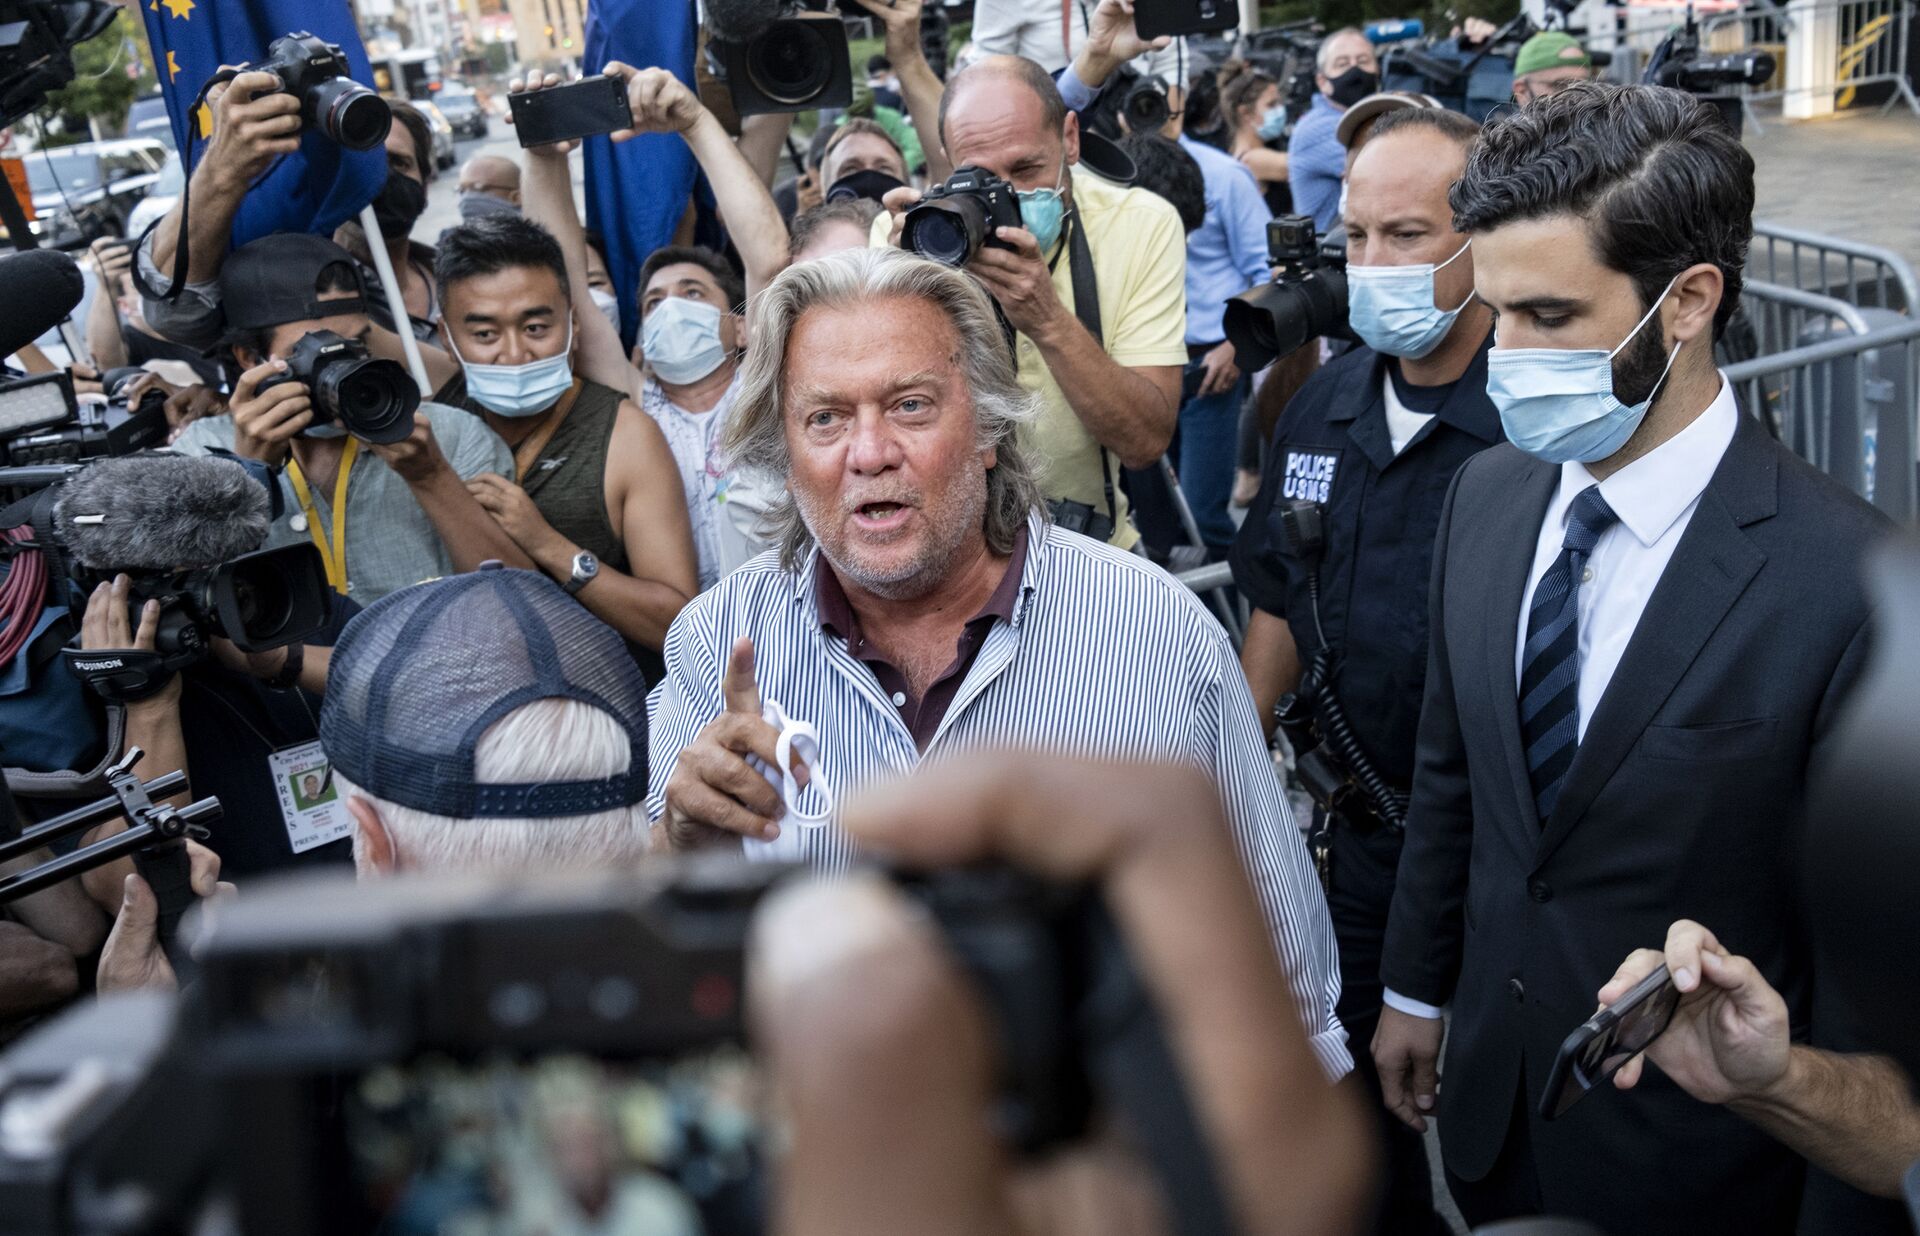 President Donald Trump's former chief strategist Steve Bannon leaves federal court, Thursday, Aug. 20, 2020, after pleading not guilty to charges that he ripped off donors to an online fundraising scheme to build a southern border wall. - Sputnik International, 1920, 29.11.2021